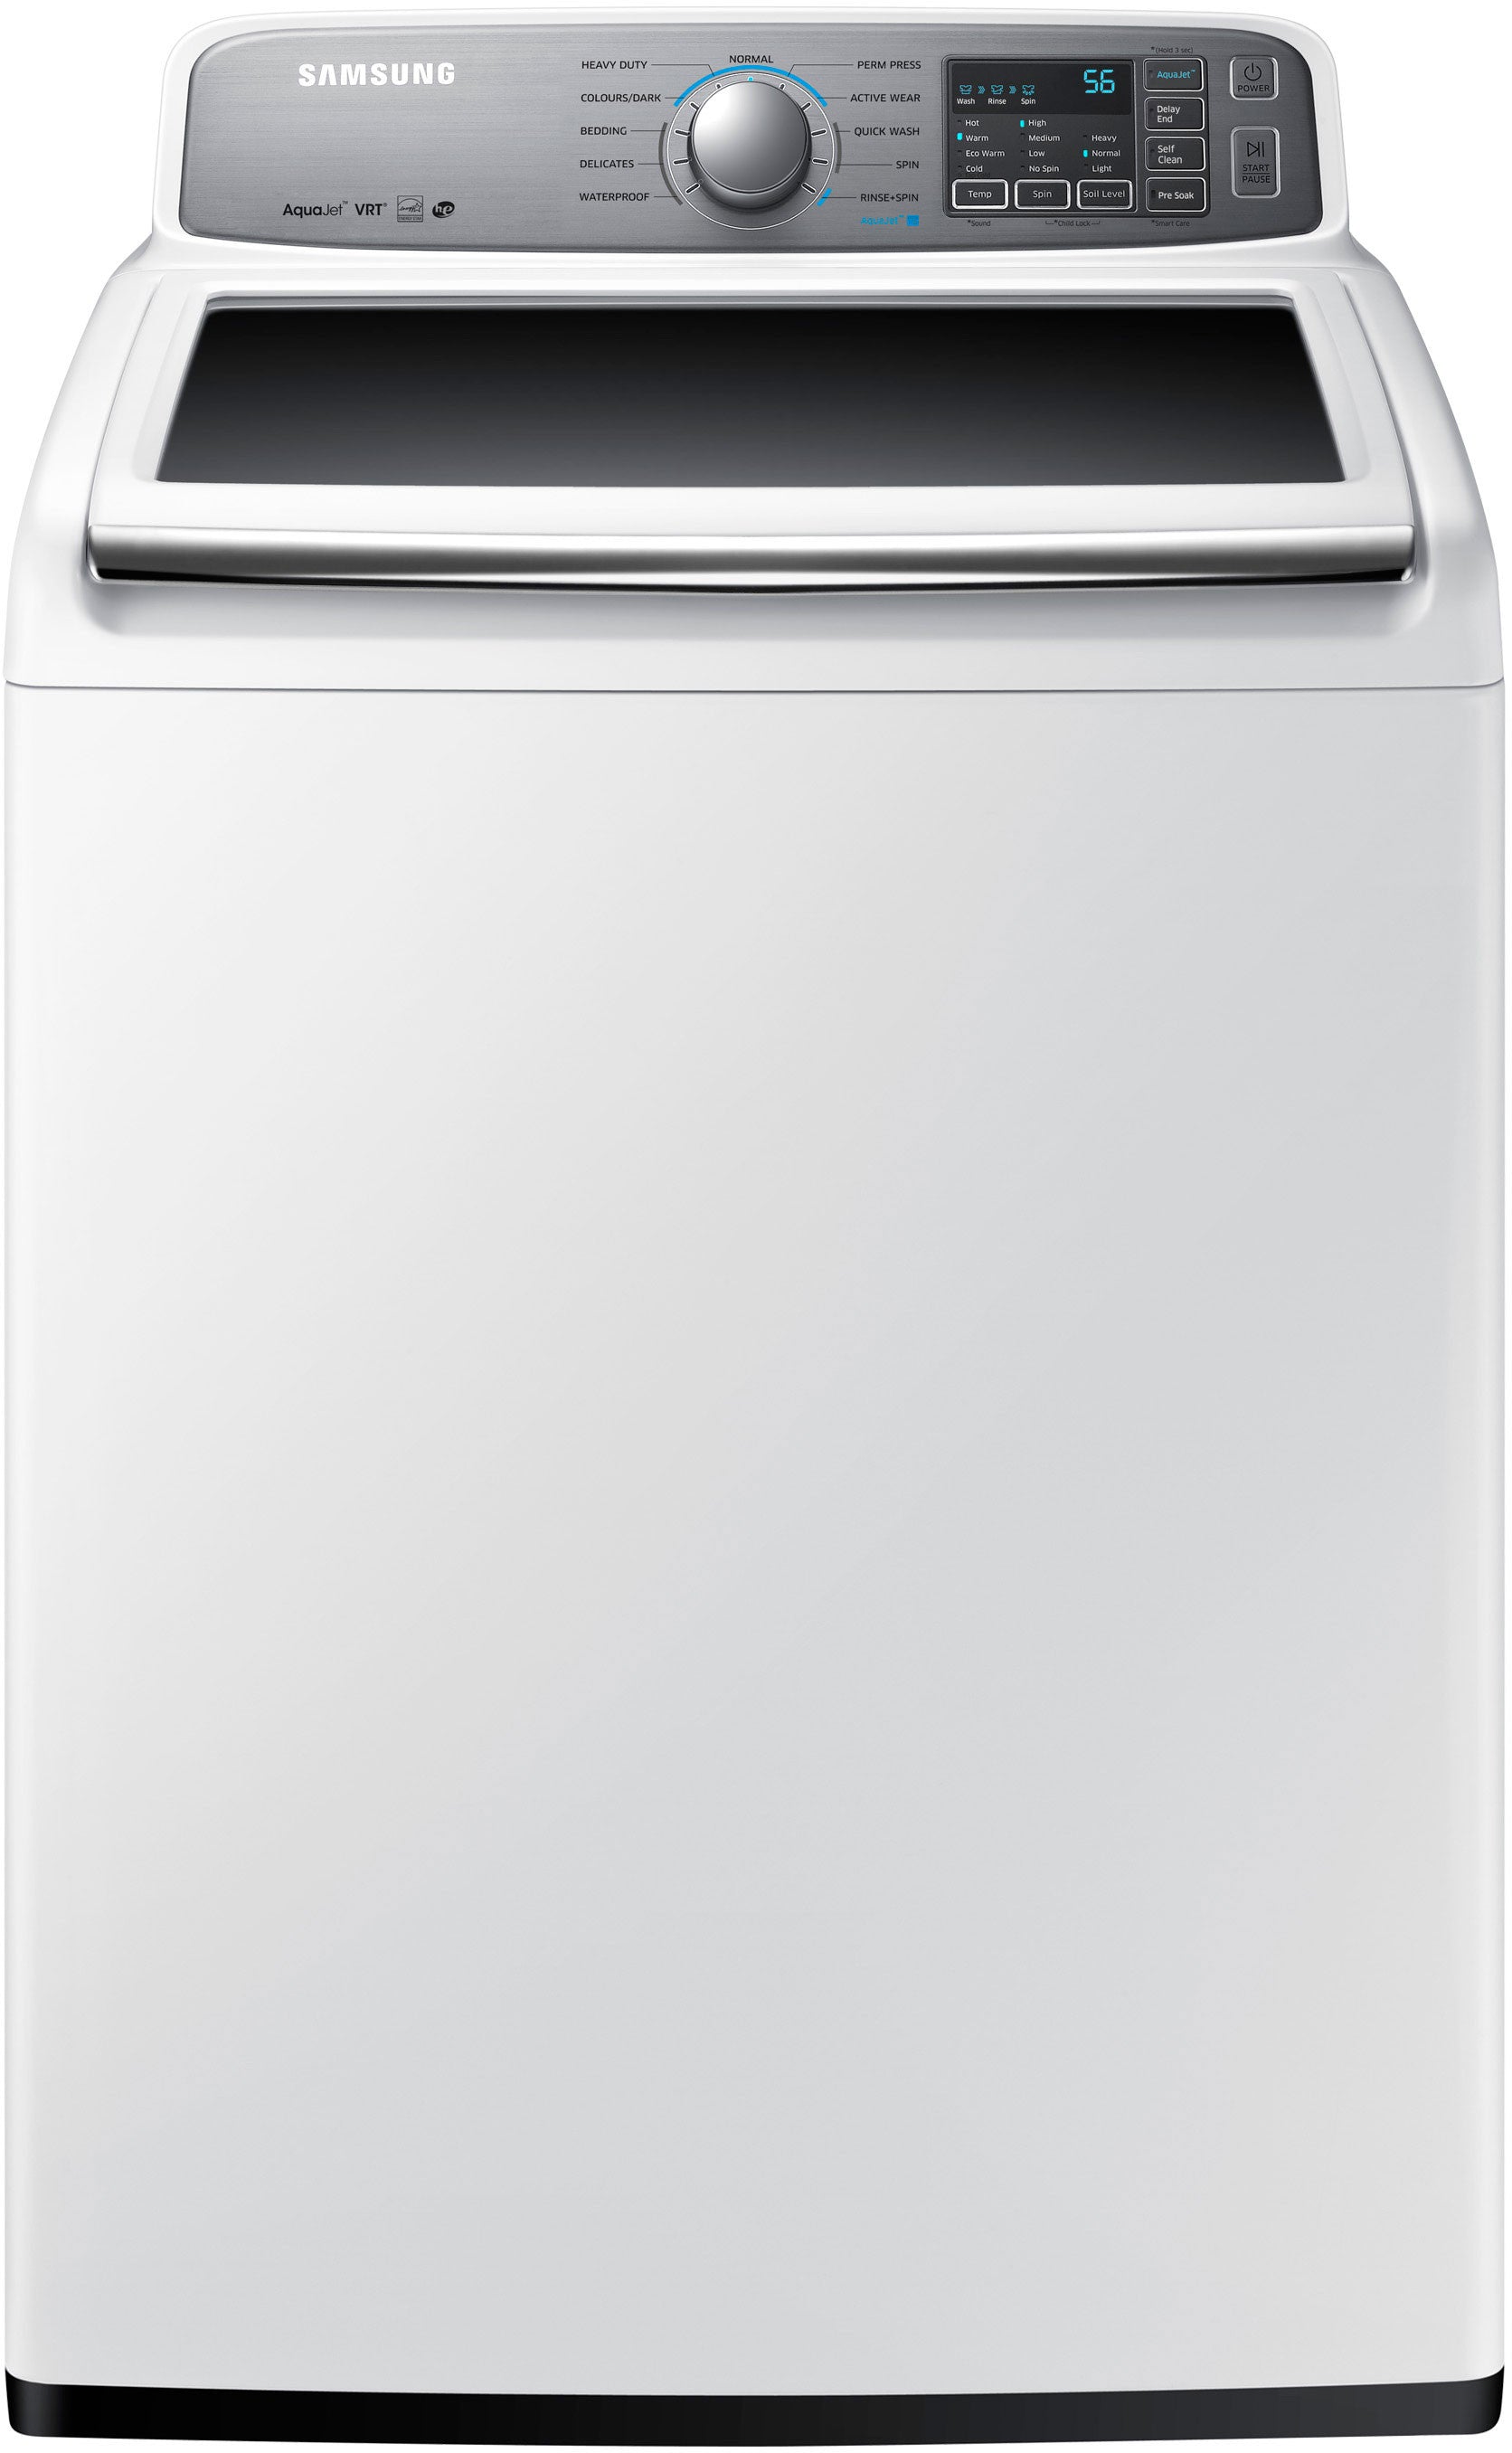 Samsung WA45H7200AW/A2 27" Top-load Washer With 4.5 Cu. Ft. Capacity - Samsung Parts USA